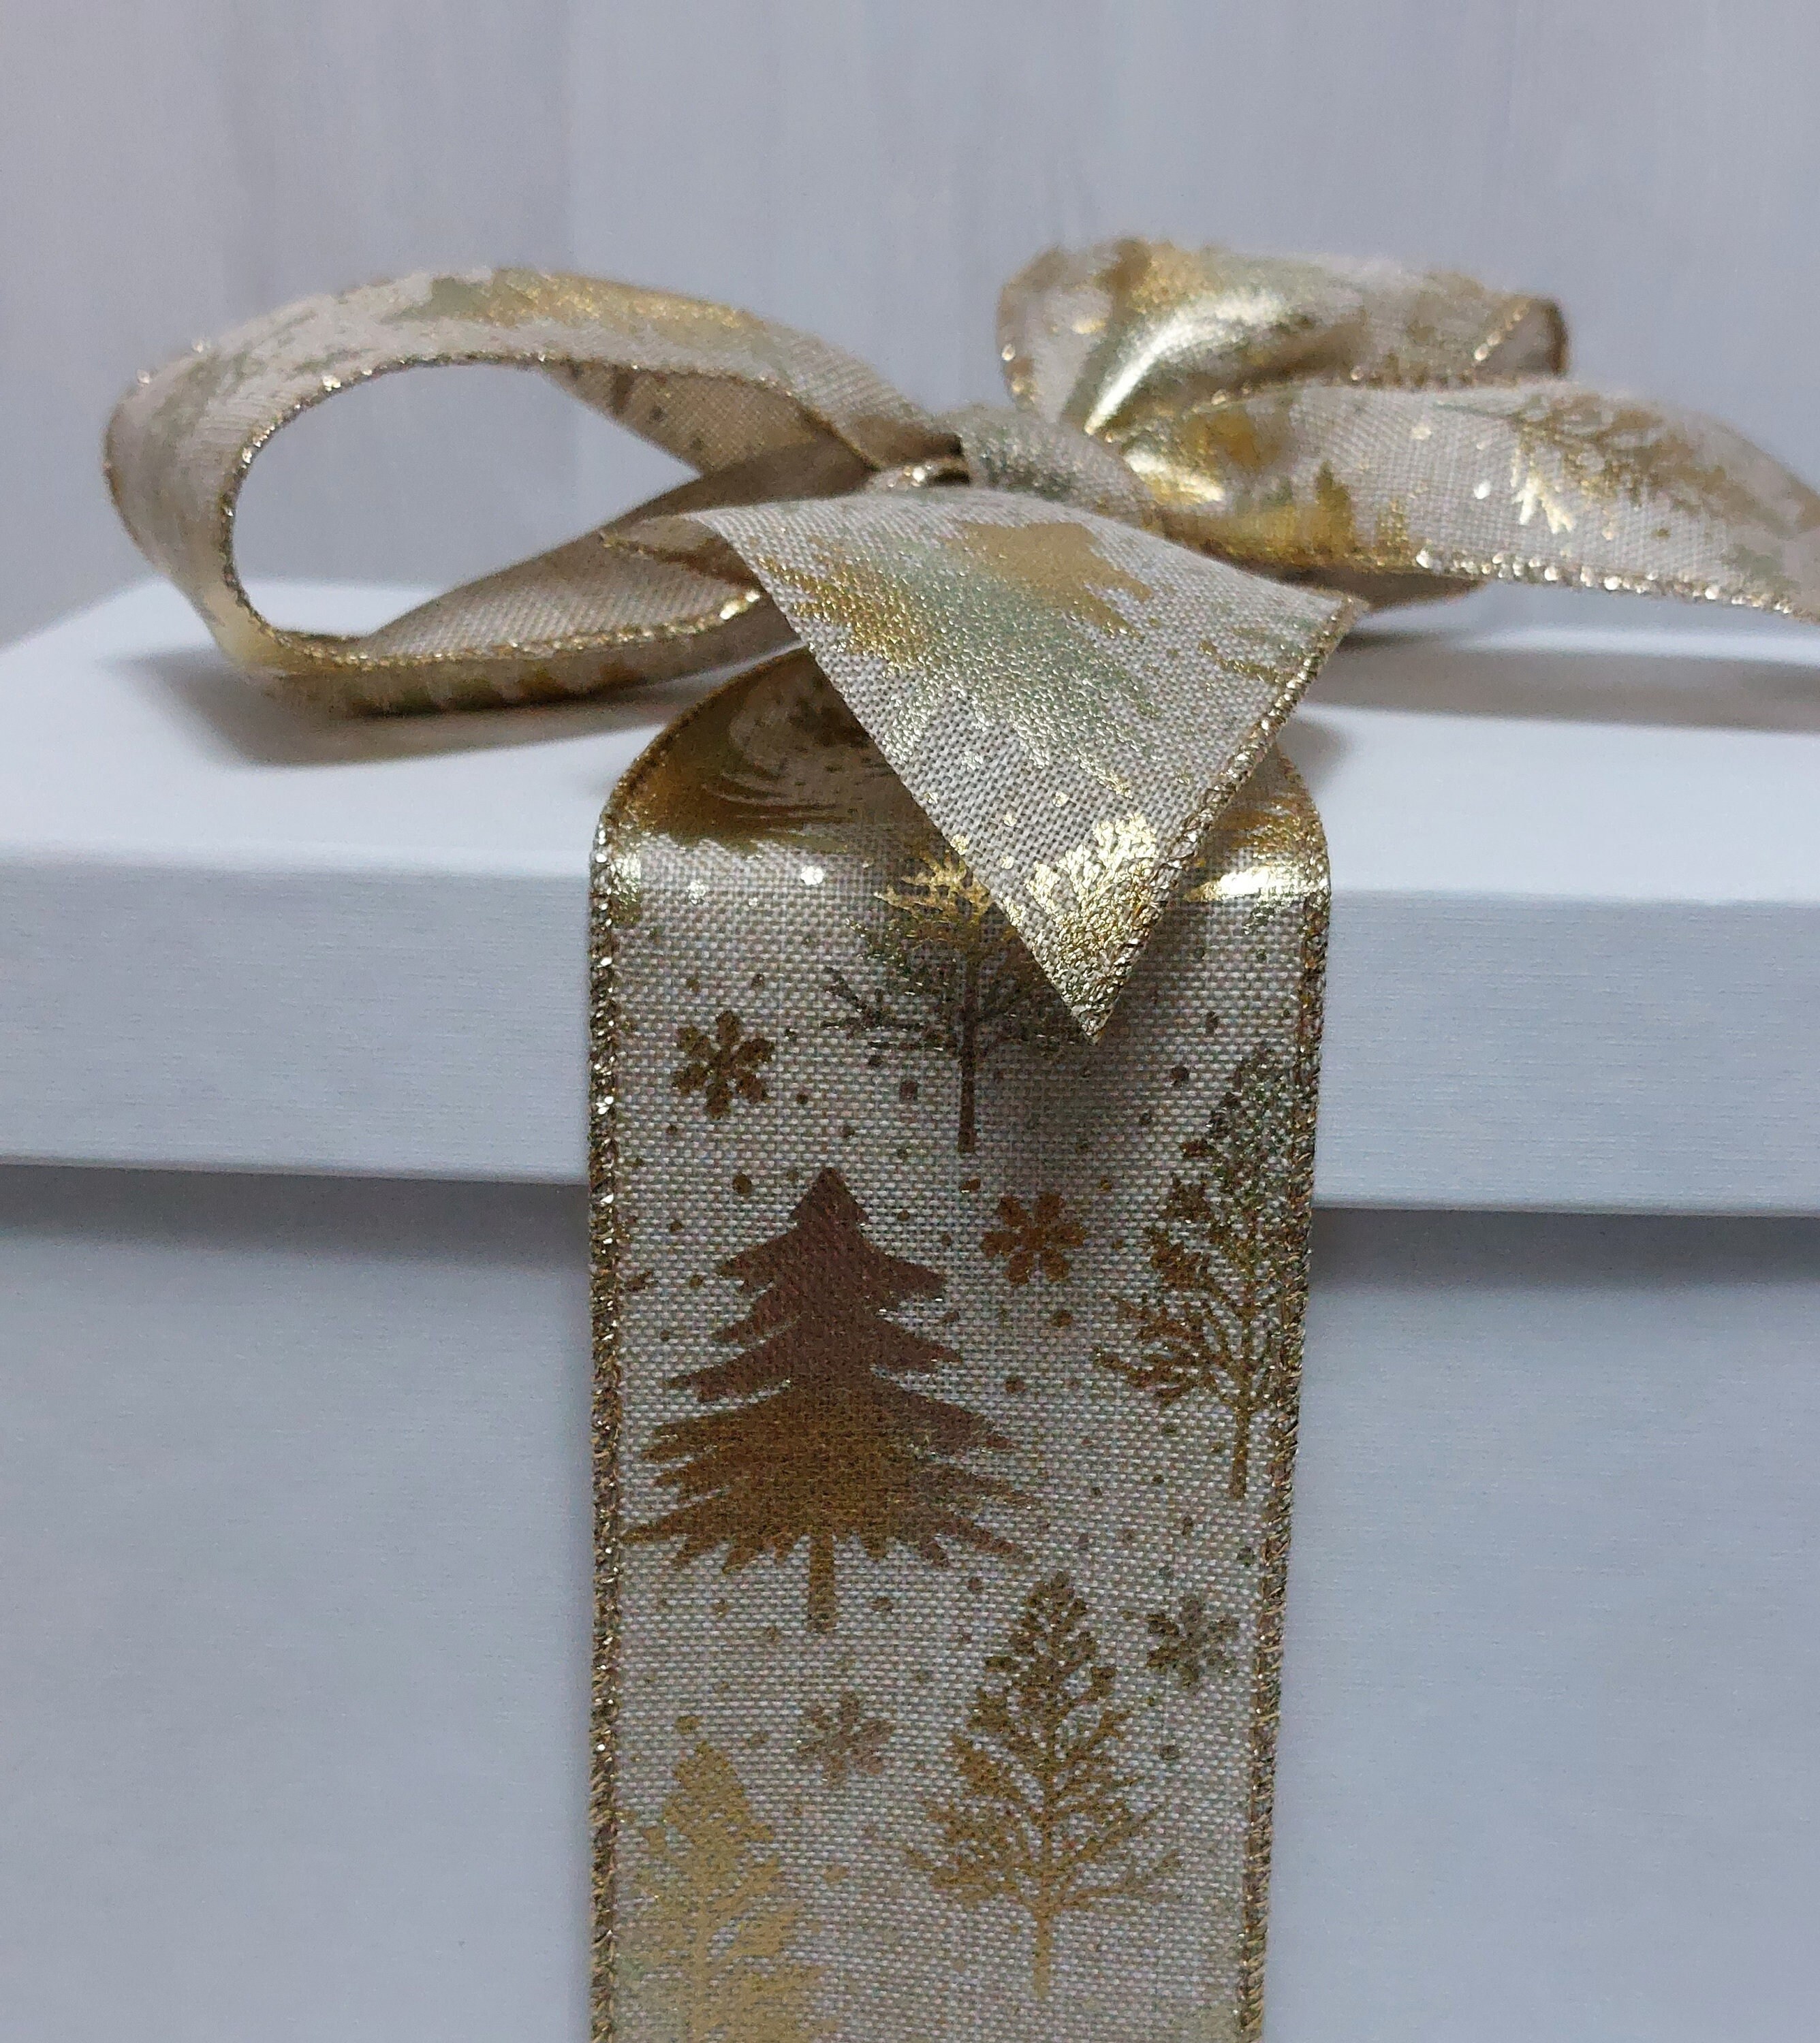  Royal Imports Metallic Sparkly Glitter Fabric Ribbon Roll for  Christmas, Craft, Floral, Wedding, Sewing, Bow Making, Gift Wrapping, 25  Yards Spool, 5/8 Inch (#3), Gold